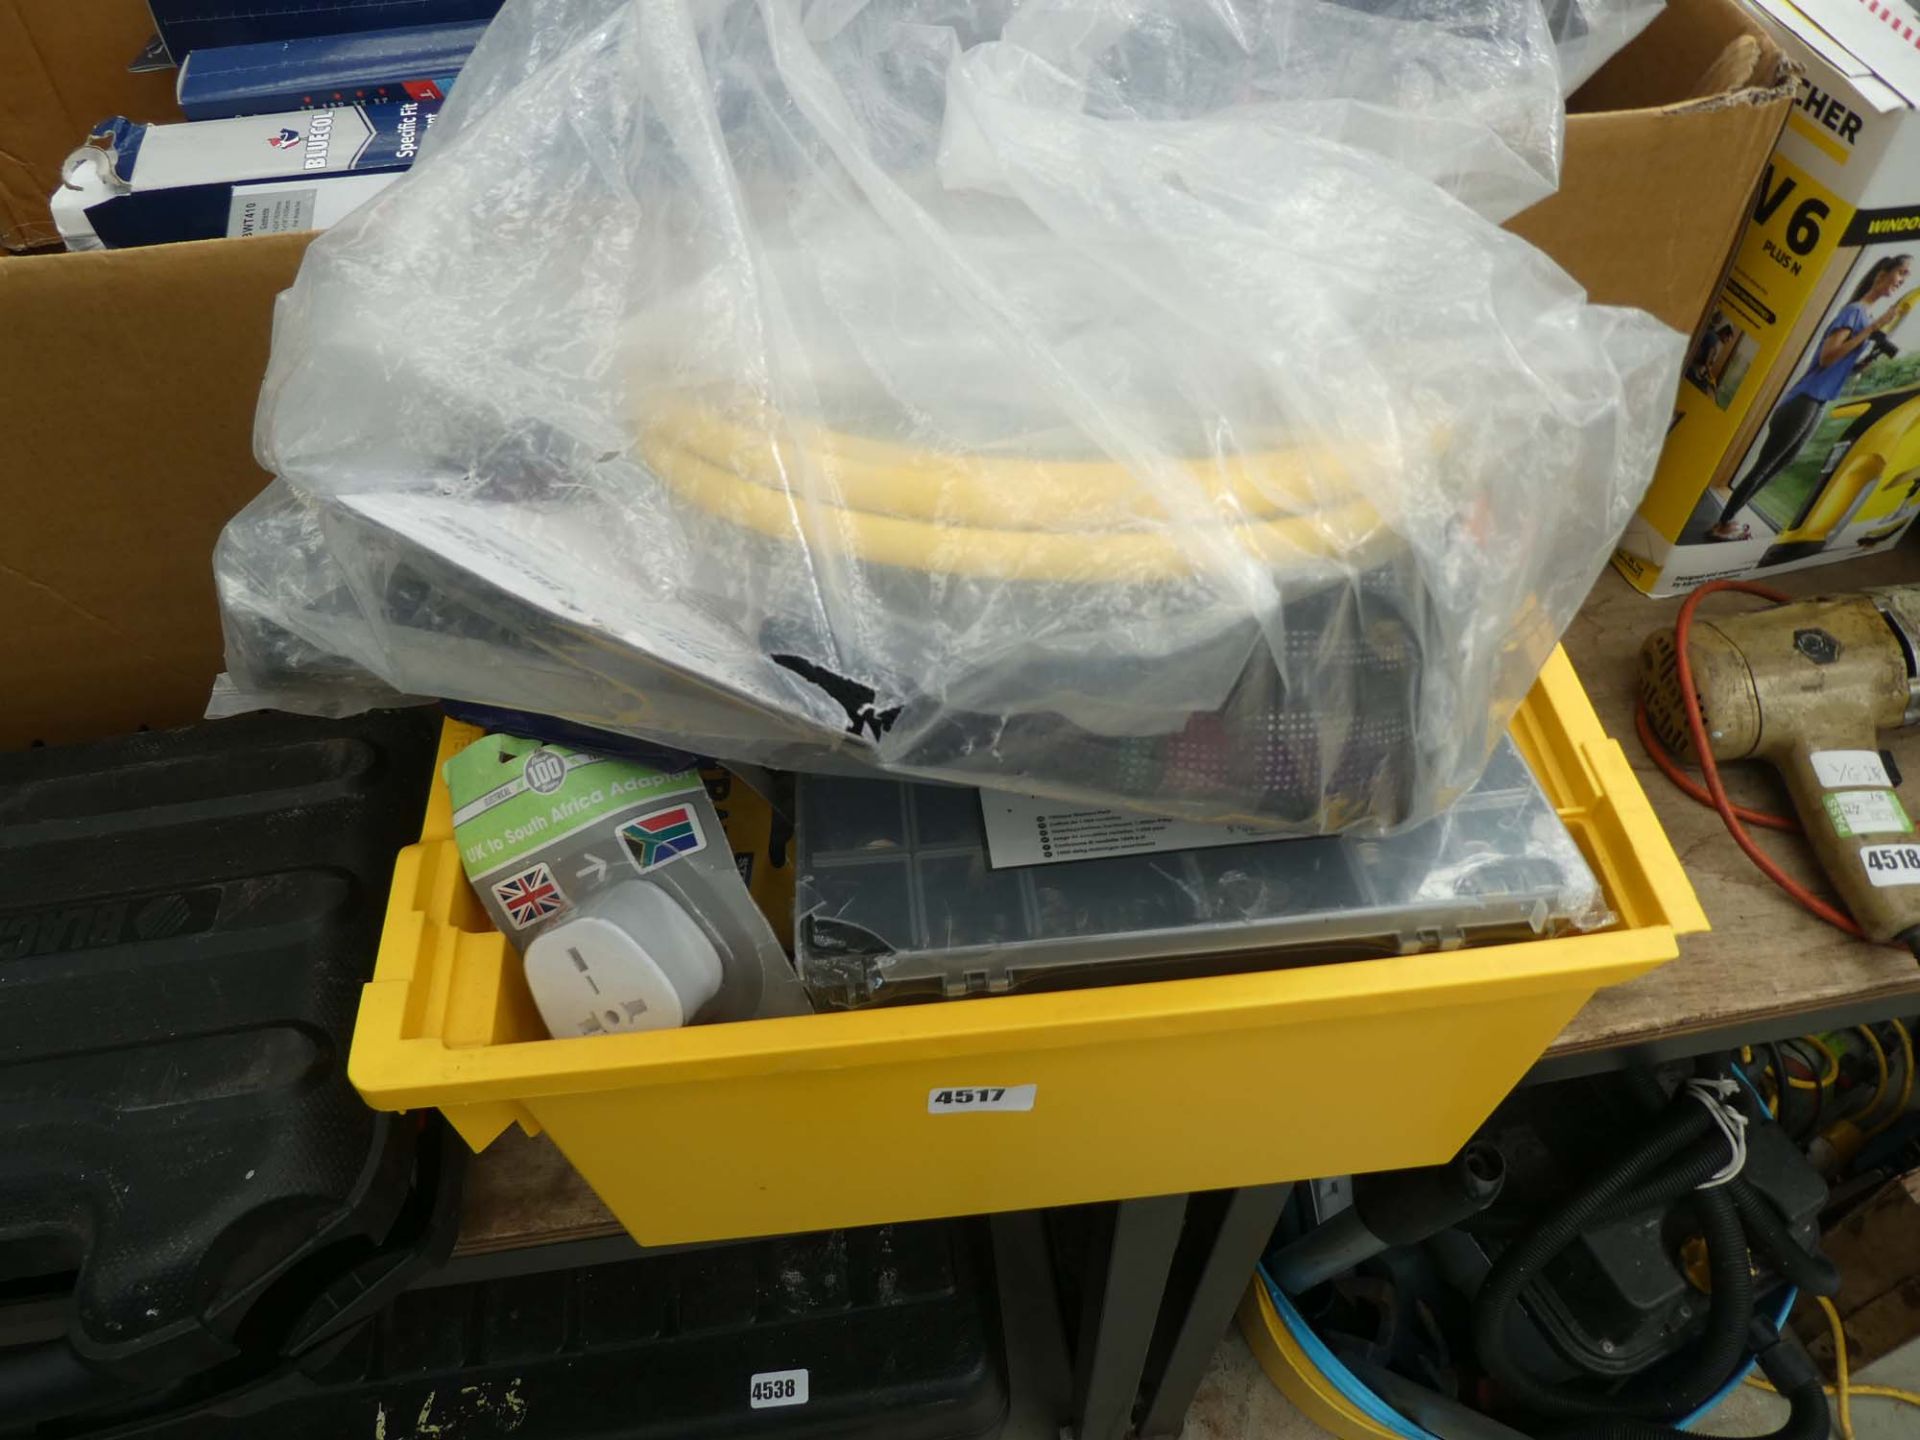 Box containing washers, switches, wire brushes, etc